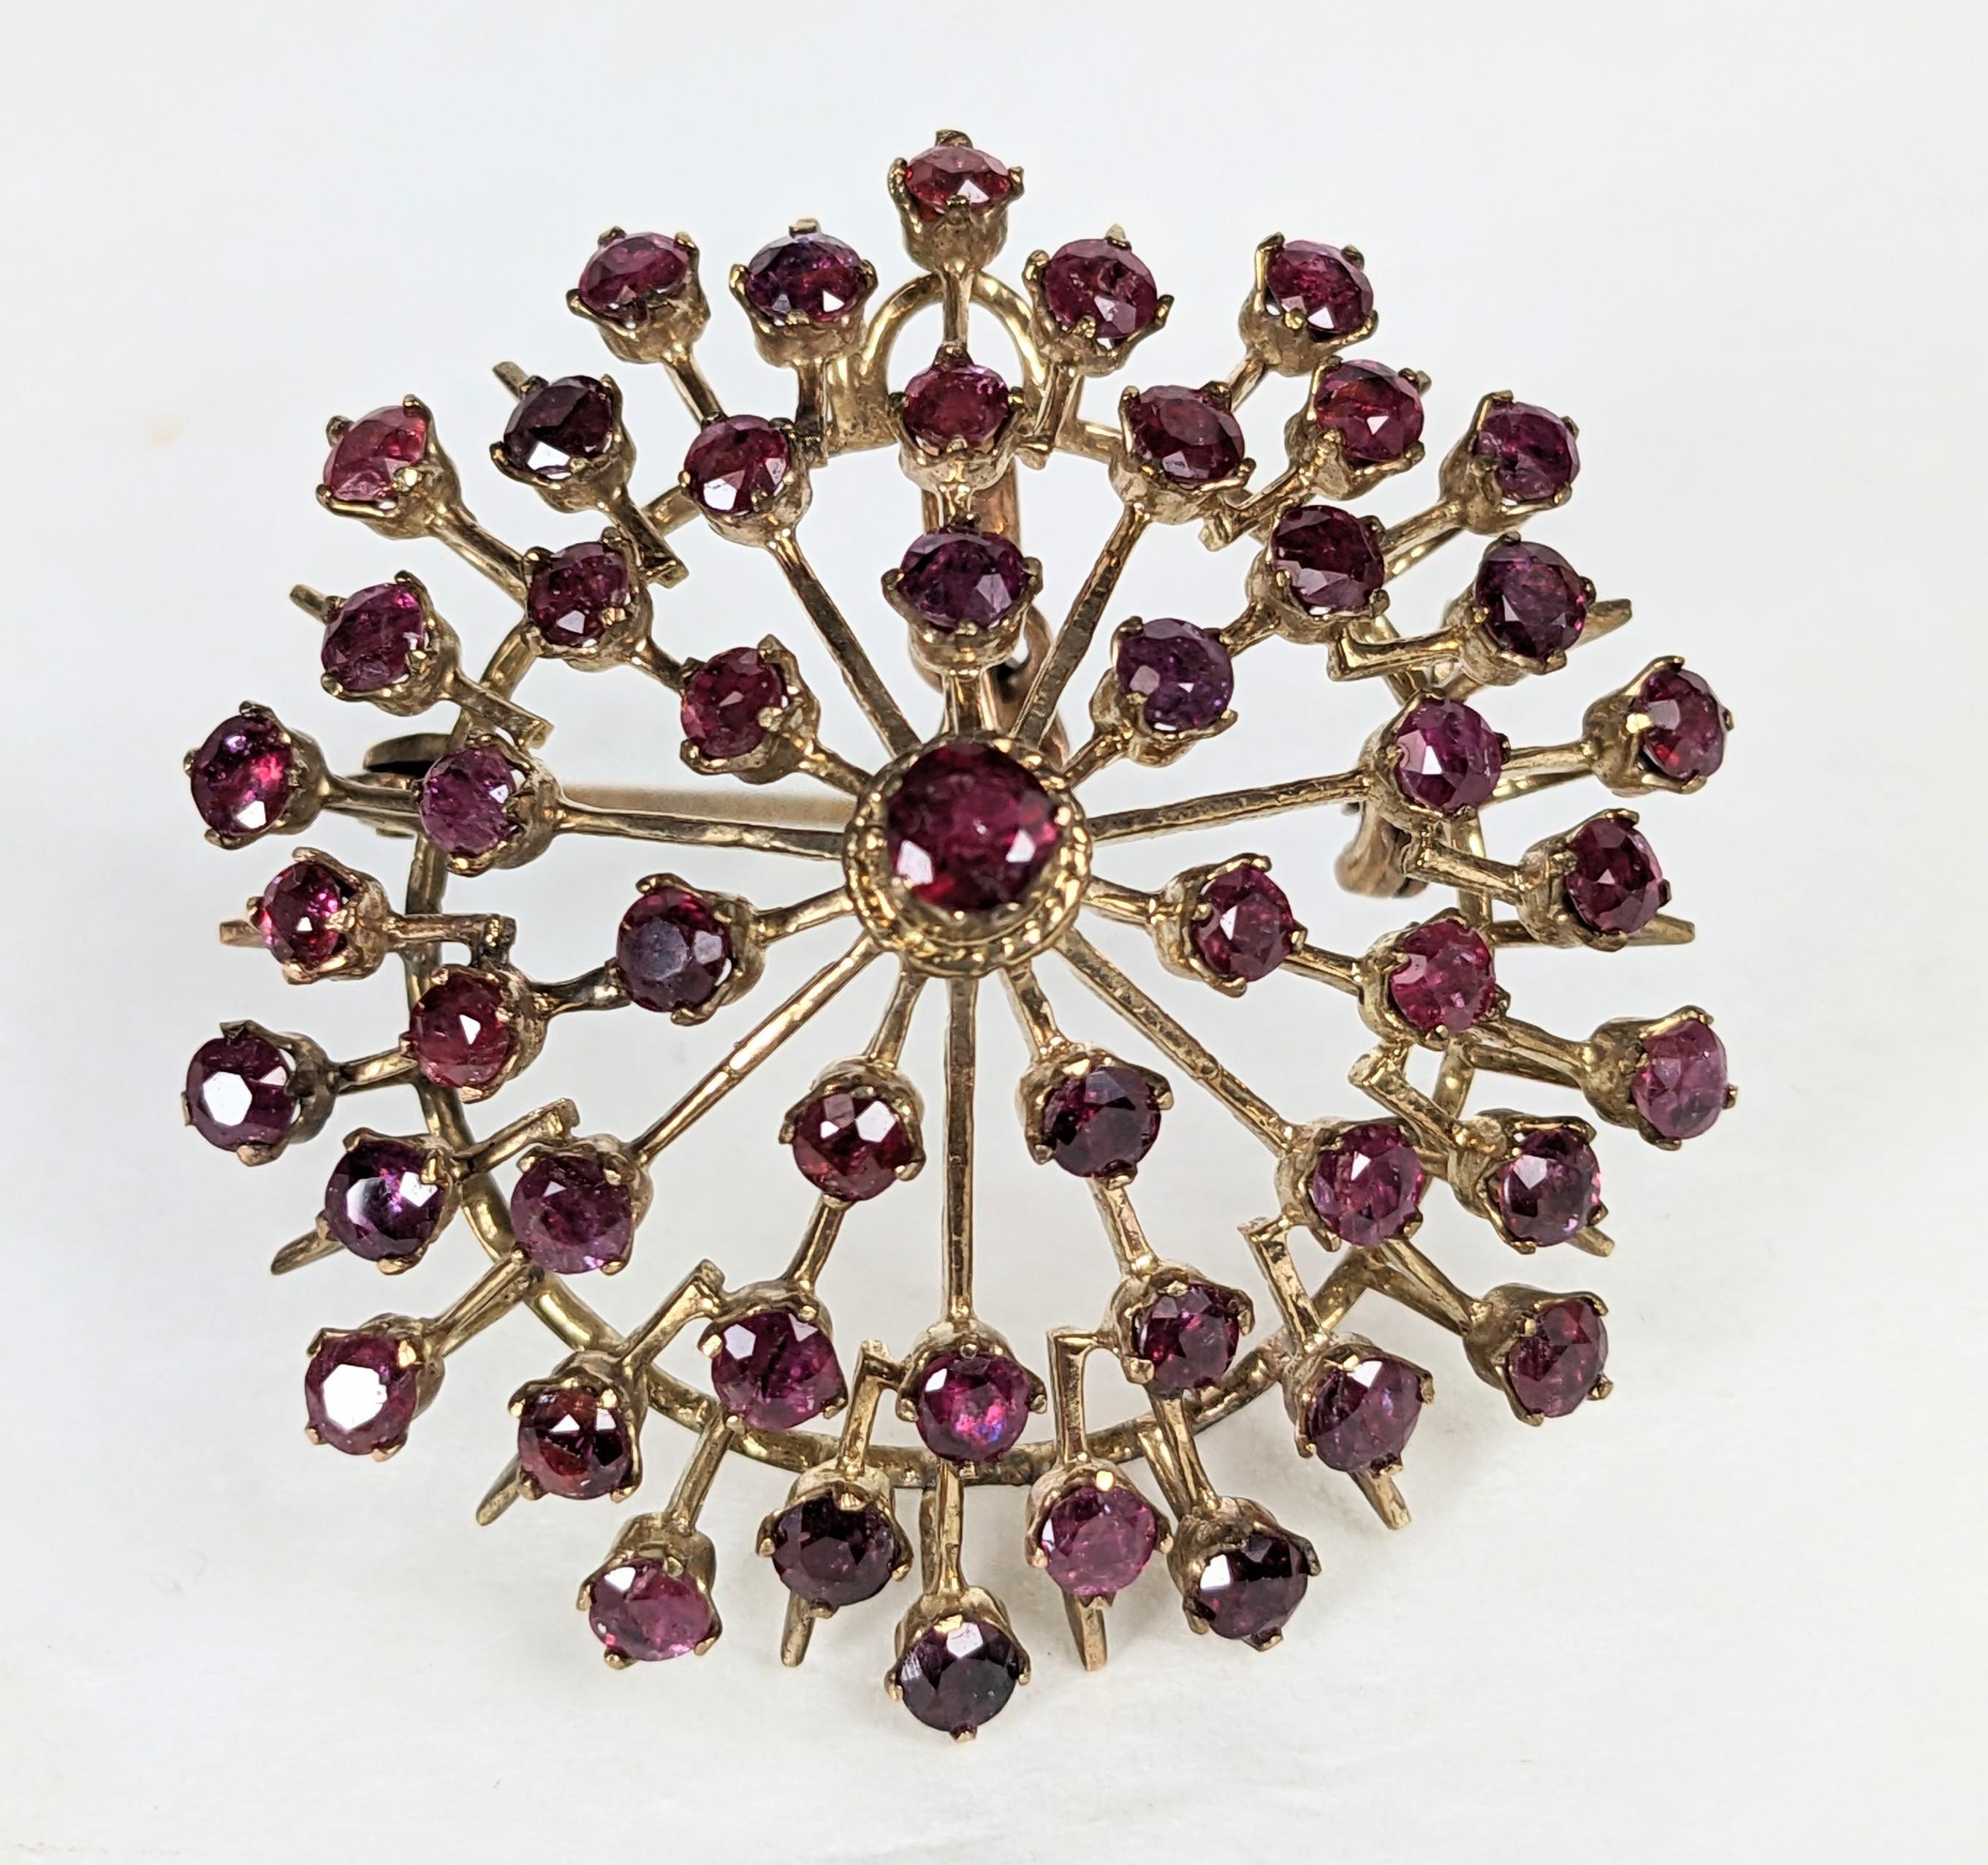 Mid Century Ruby Starburst Brooch/Pendant from the 1960's set in 14k gold. Knife edge gold wire set in a pyramid shape with genuine rubies scattered along the top. Pendant fitting hidden in back. 1960's USA. 1.75